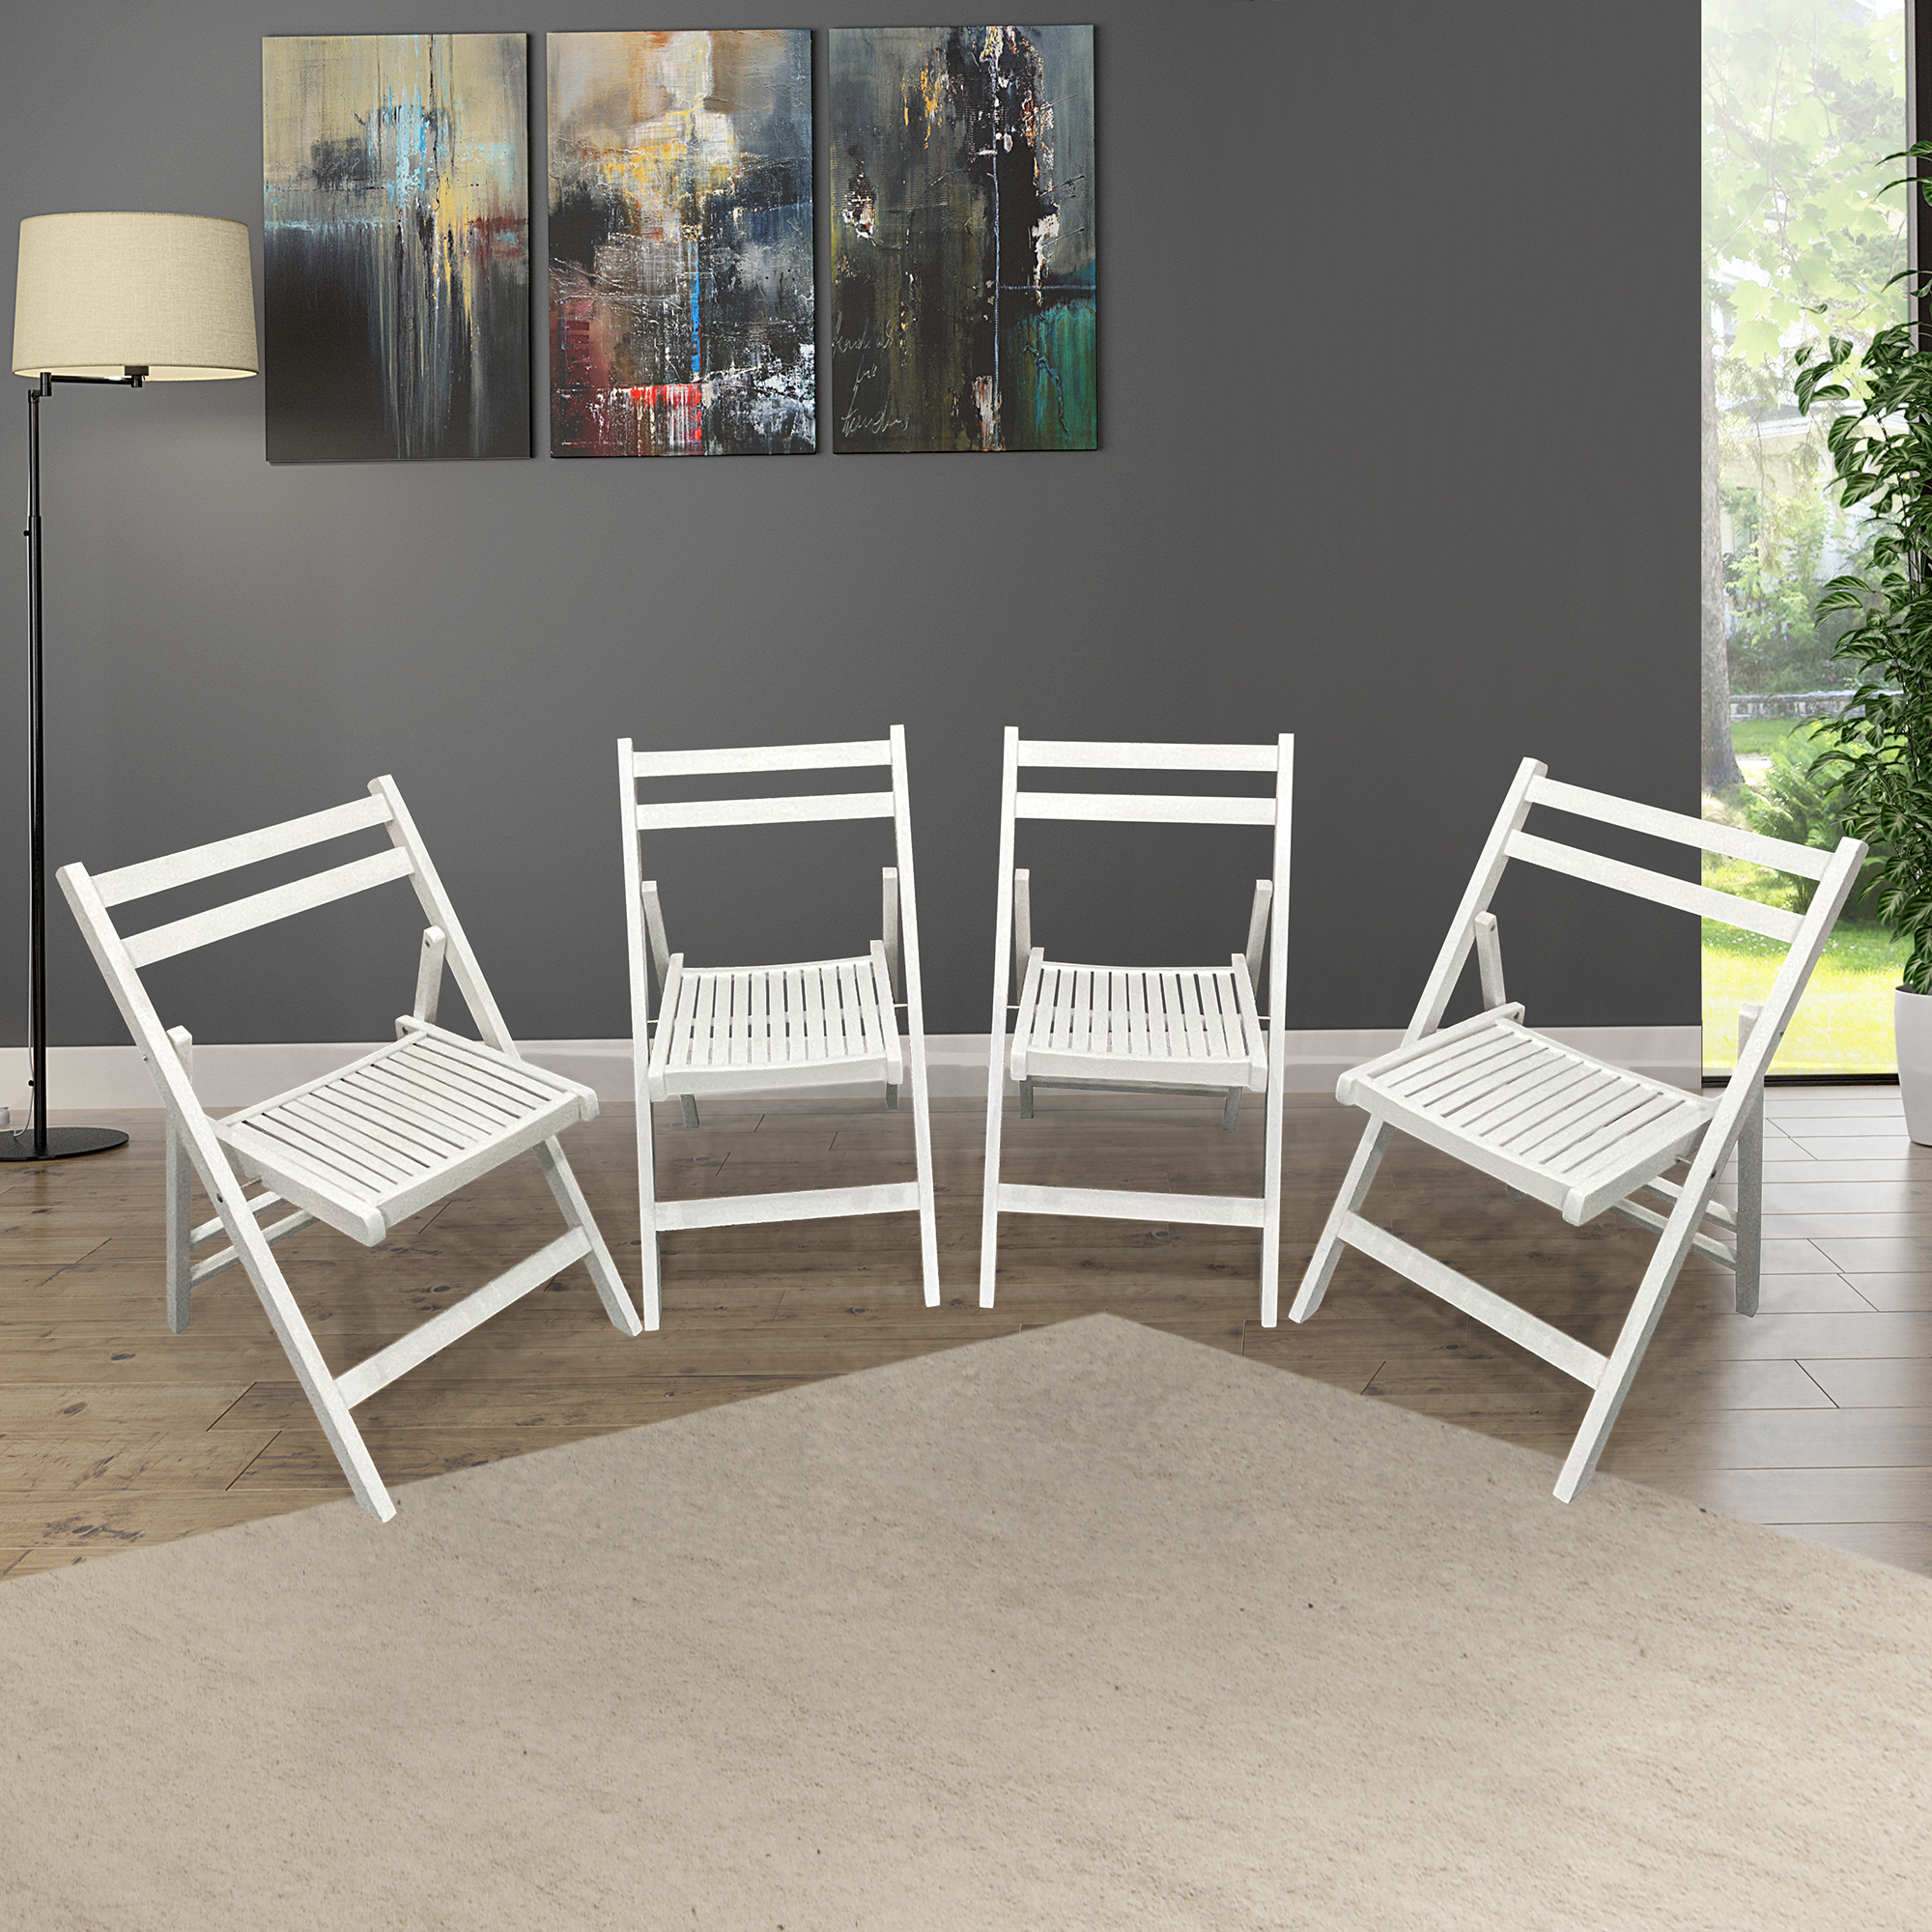 Furniture Slatted Wood Folding Special Event Chair - White, Set of 4 ，FOLDING CHAIR, FOLDABLE STYLE-Boyel Living